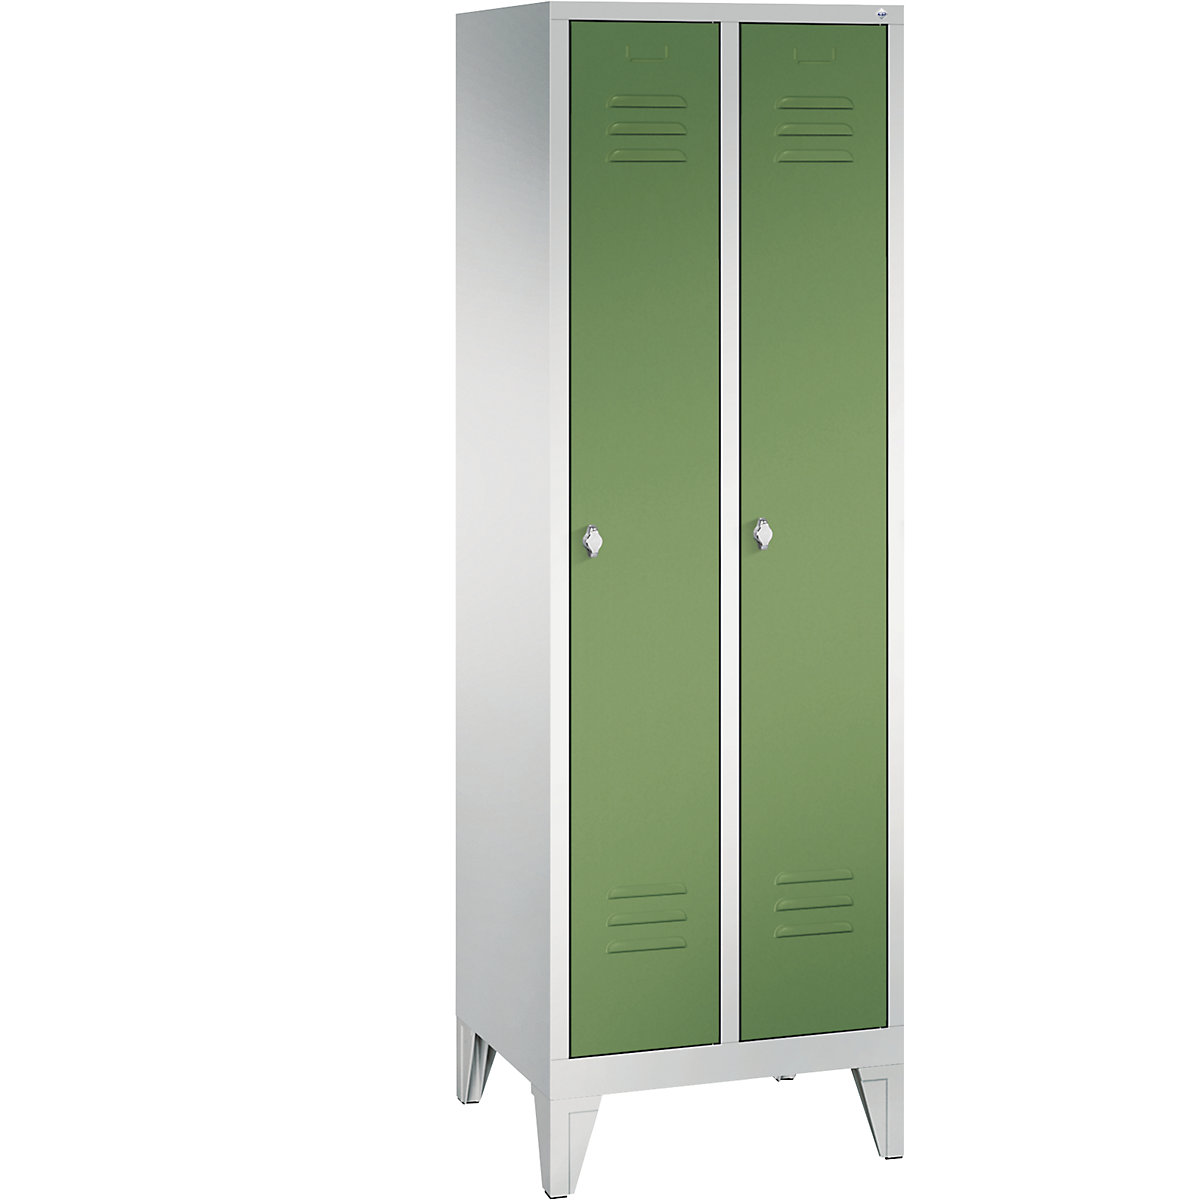 CLASSIC storage cupboard with feet – C+P, 2 compartments, compartment width 300 mm, light grey / reseda green-12